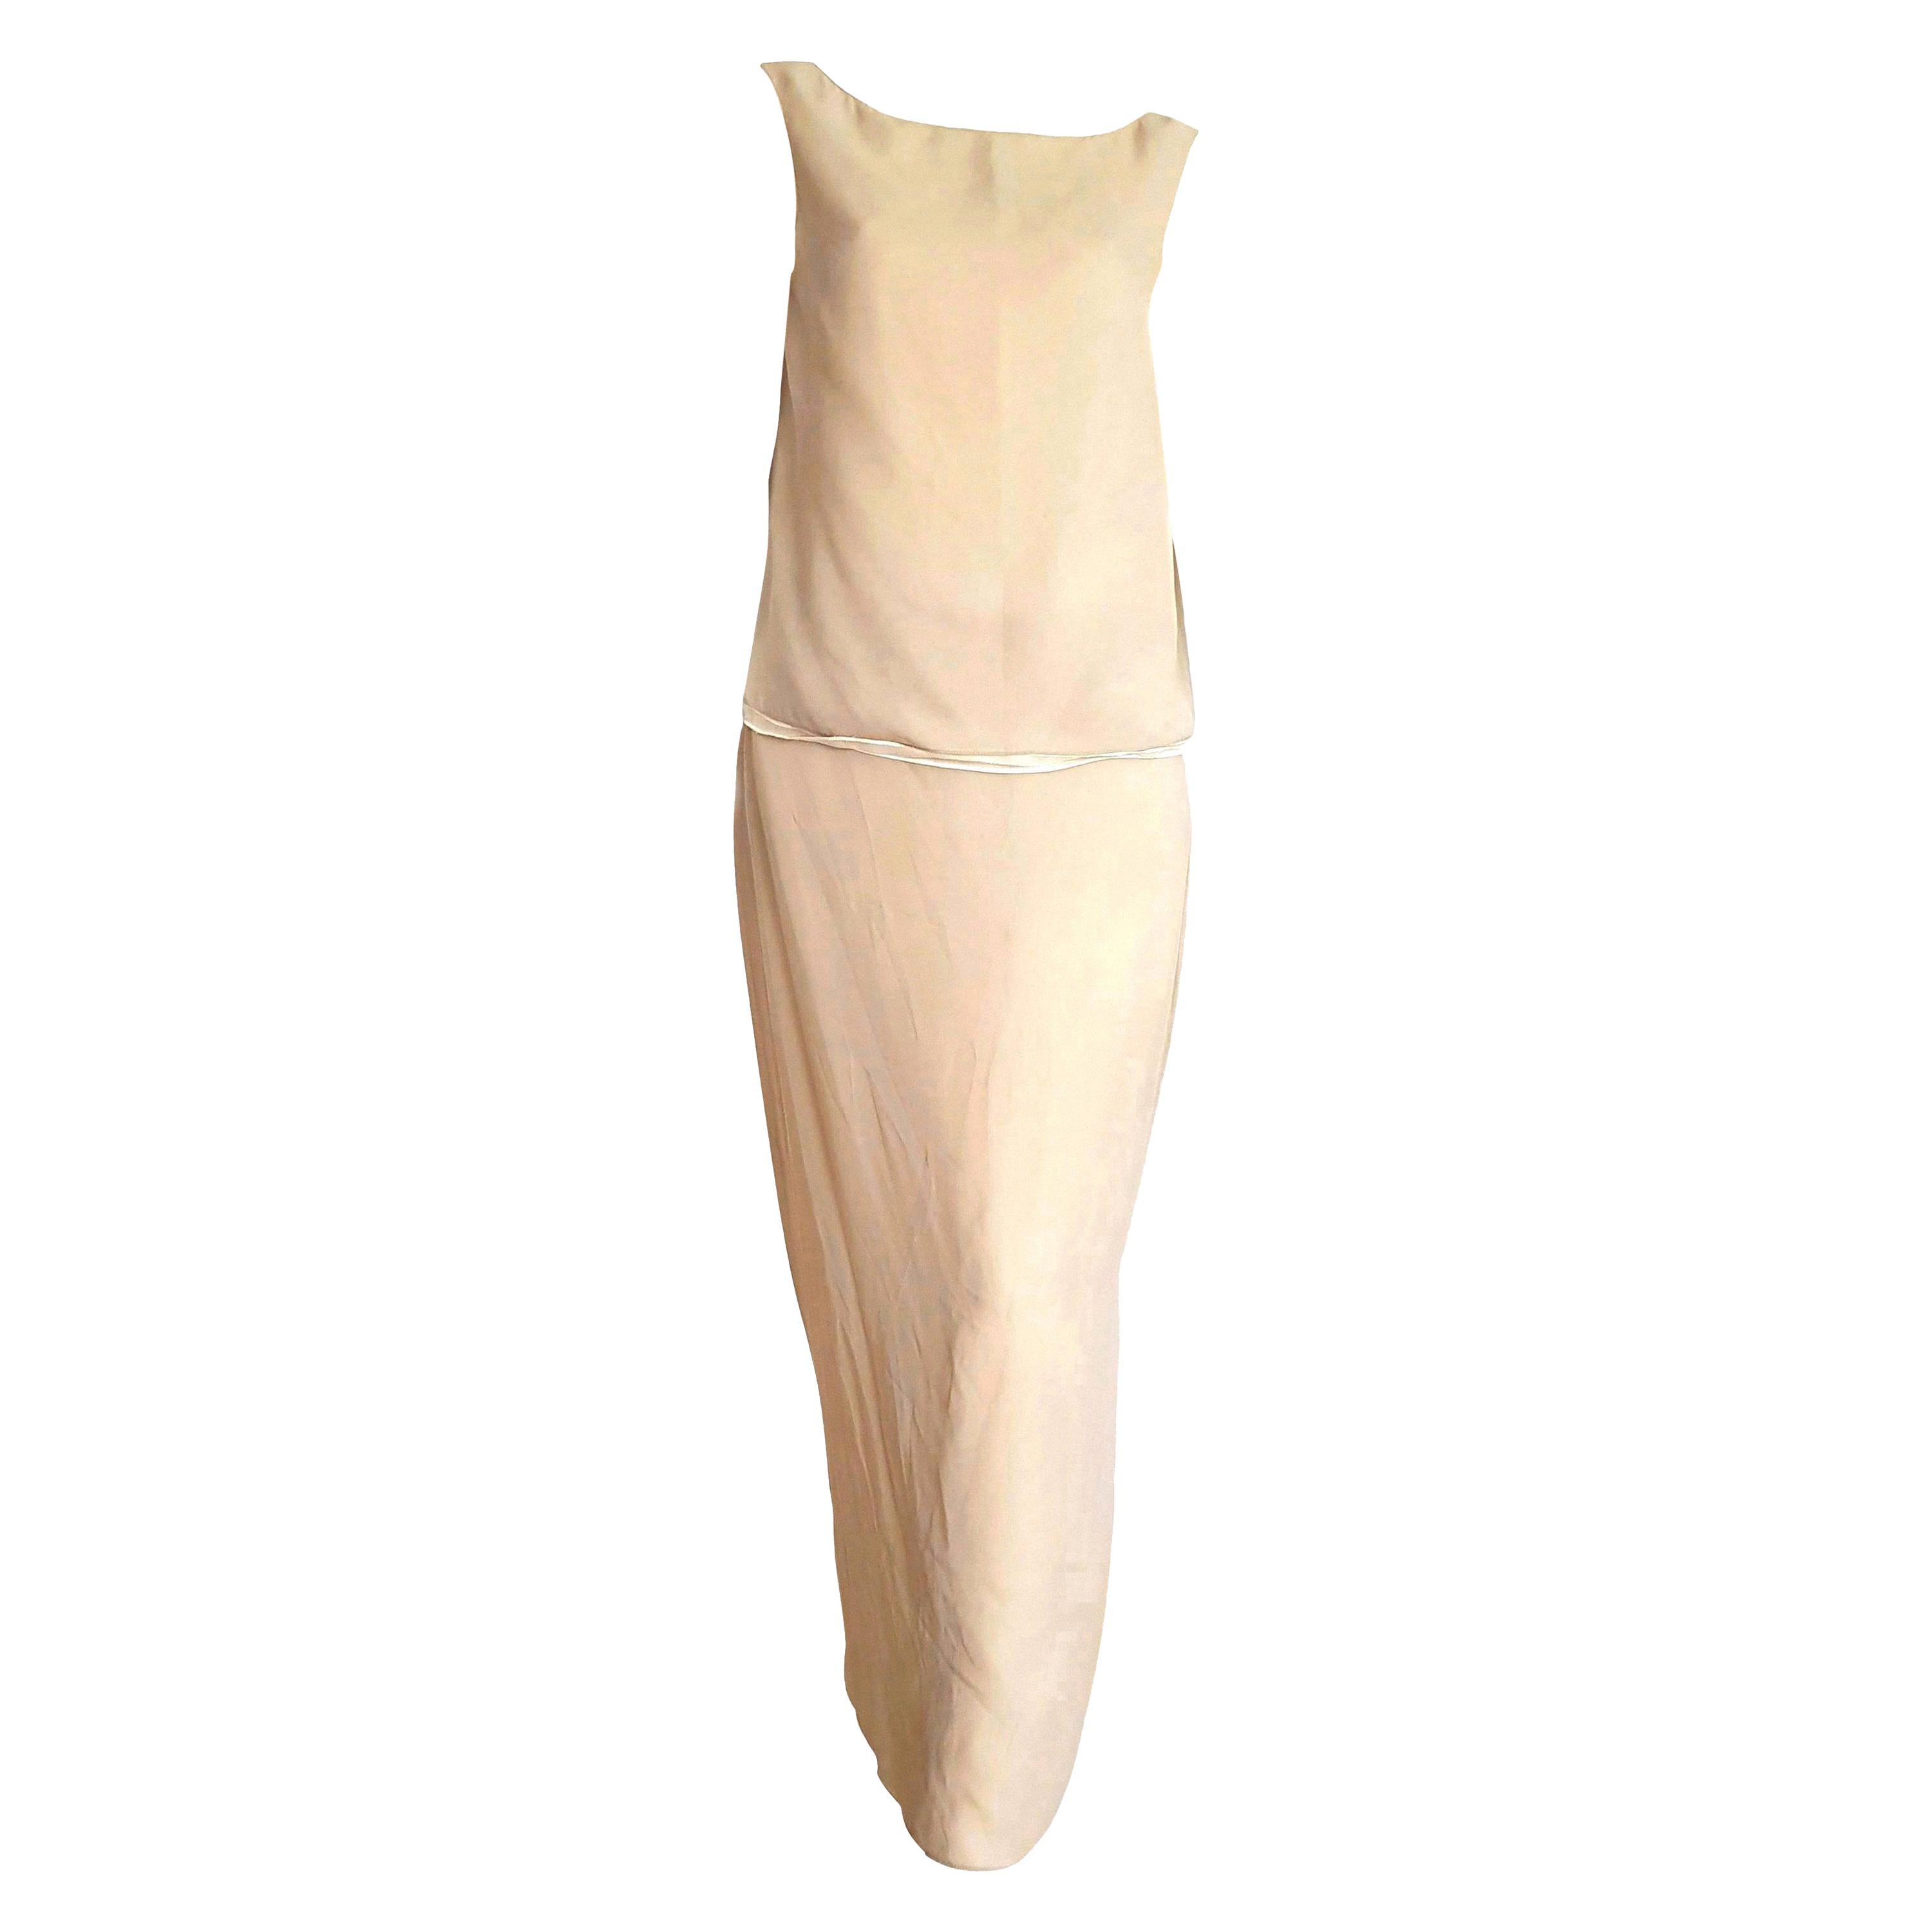 DONNA KARAN "New" two Beige tones Double layer Top and Skirt Silk Dress - Unworn For Sale